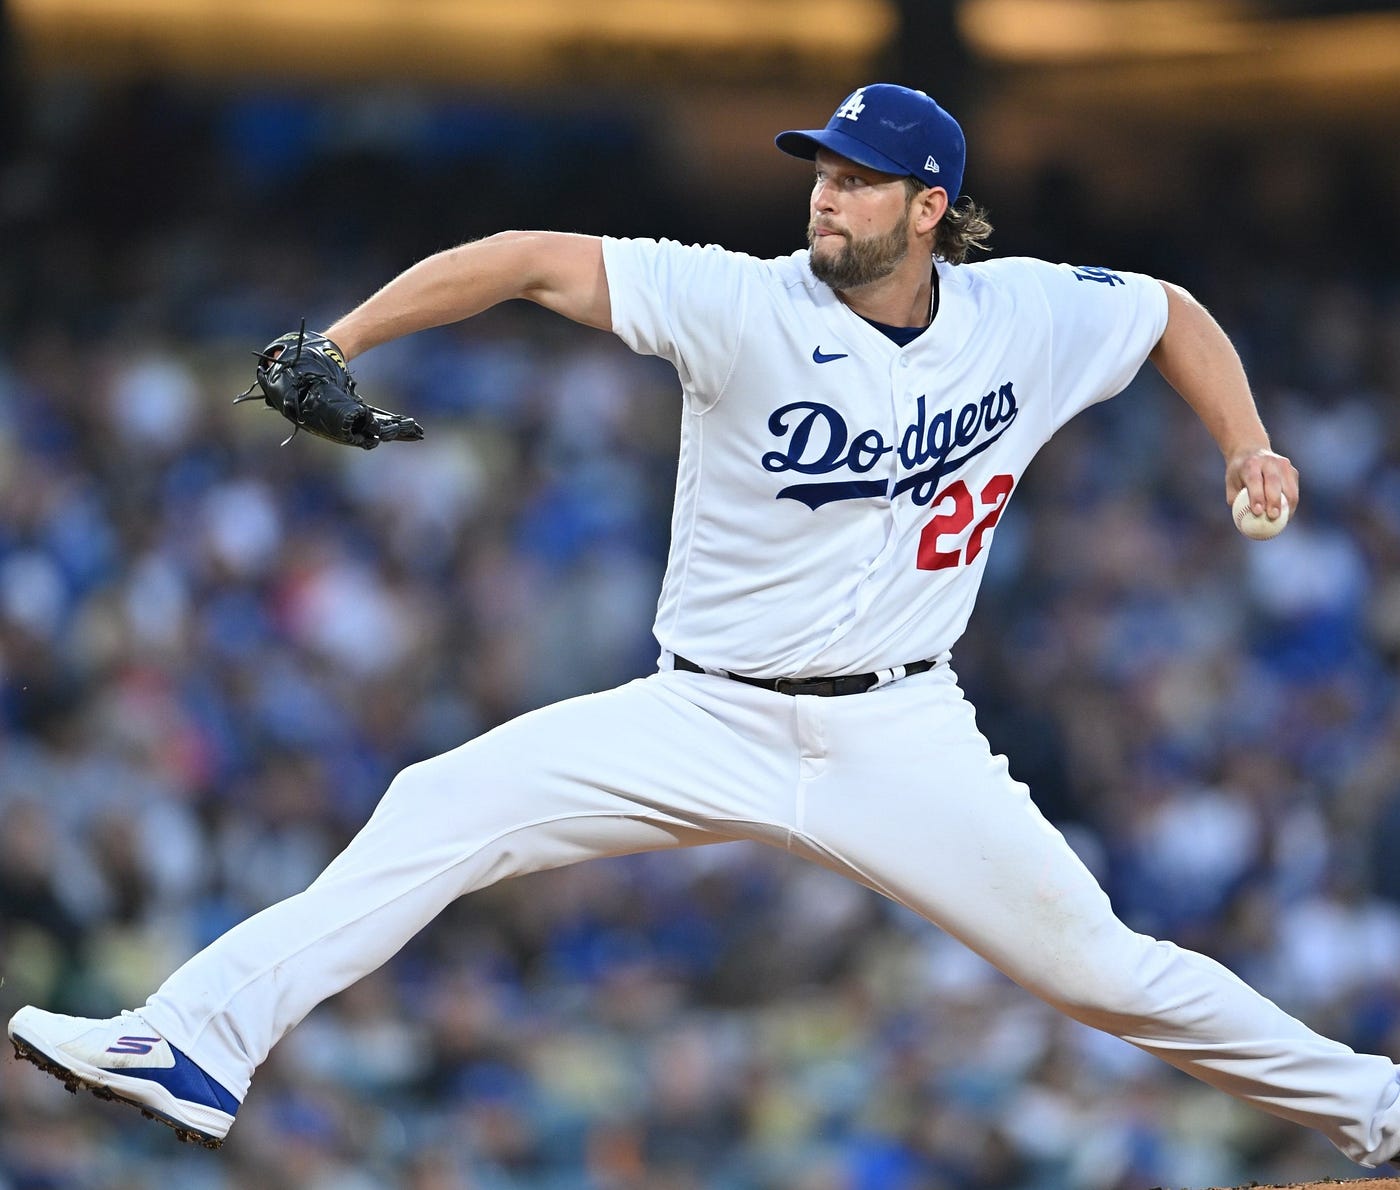 September 29, 2015: Clayton Kershaw had 13 strikeouts in a